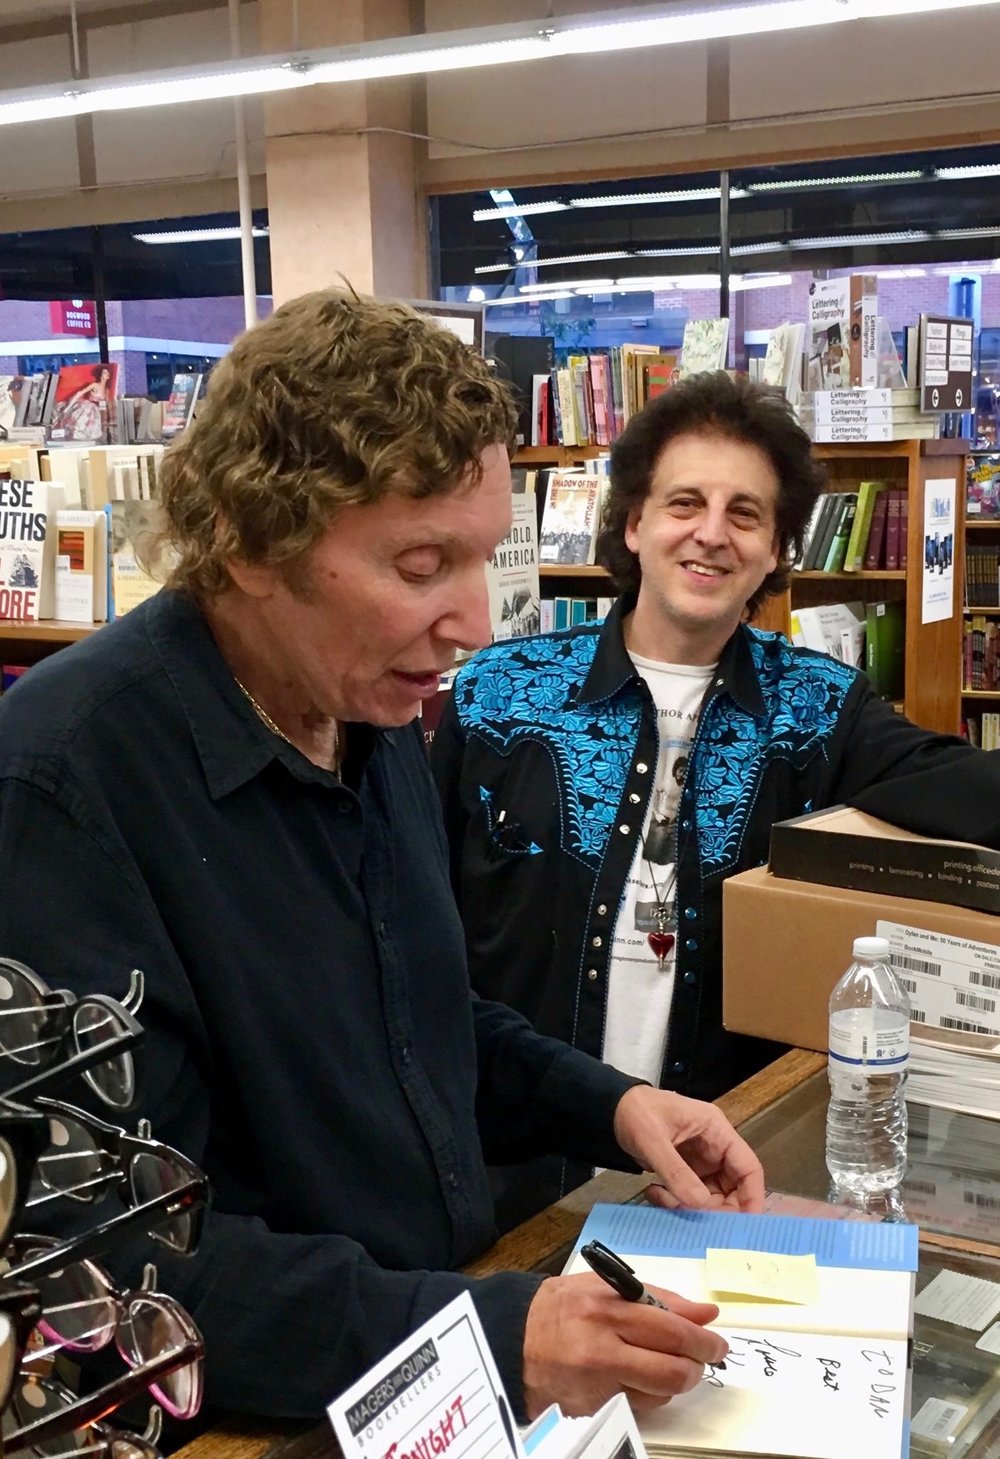  Louie Kemp and Magic Marc  Magers &amp; Quinn Booksellers  Minneapolis, MN / August 14th, 2019 / Photo by  Thor Anderson      